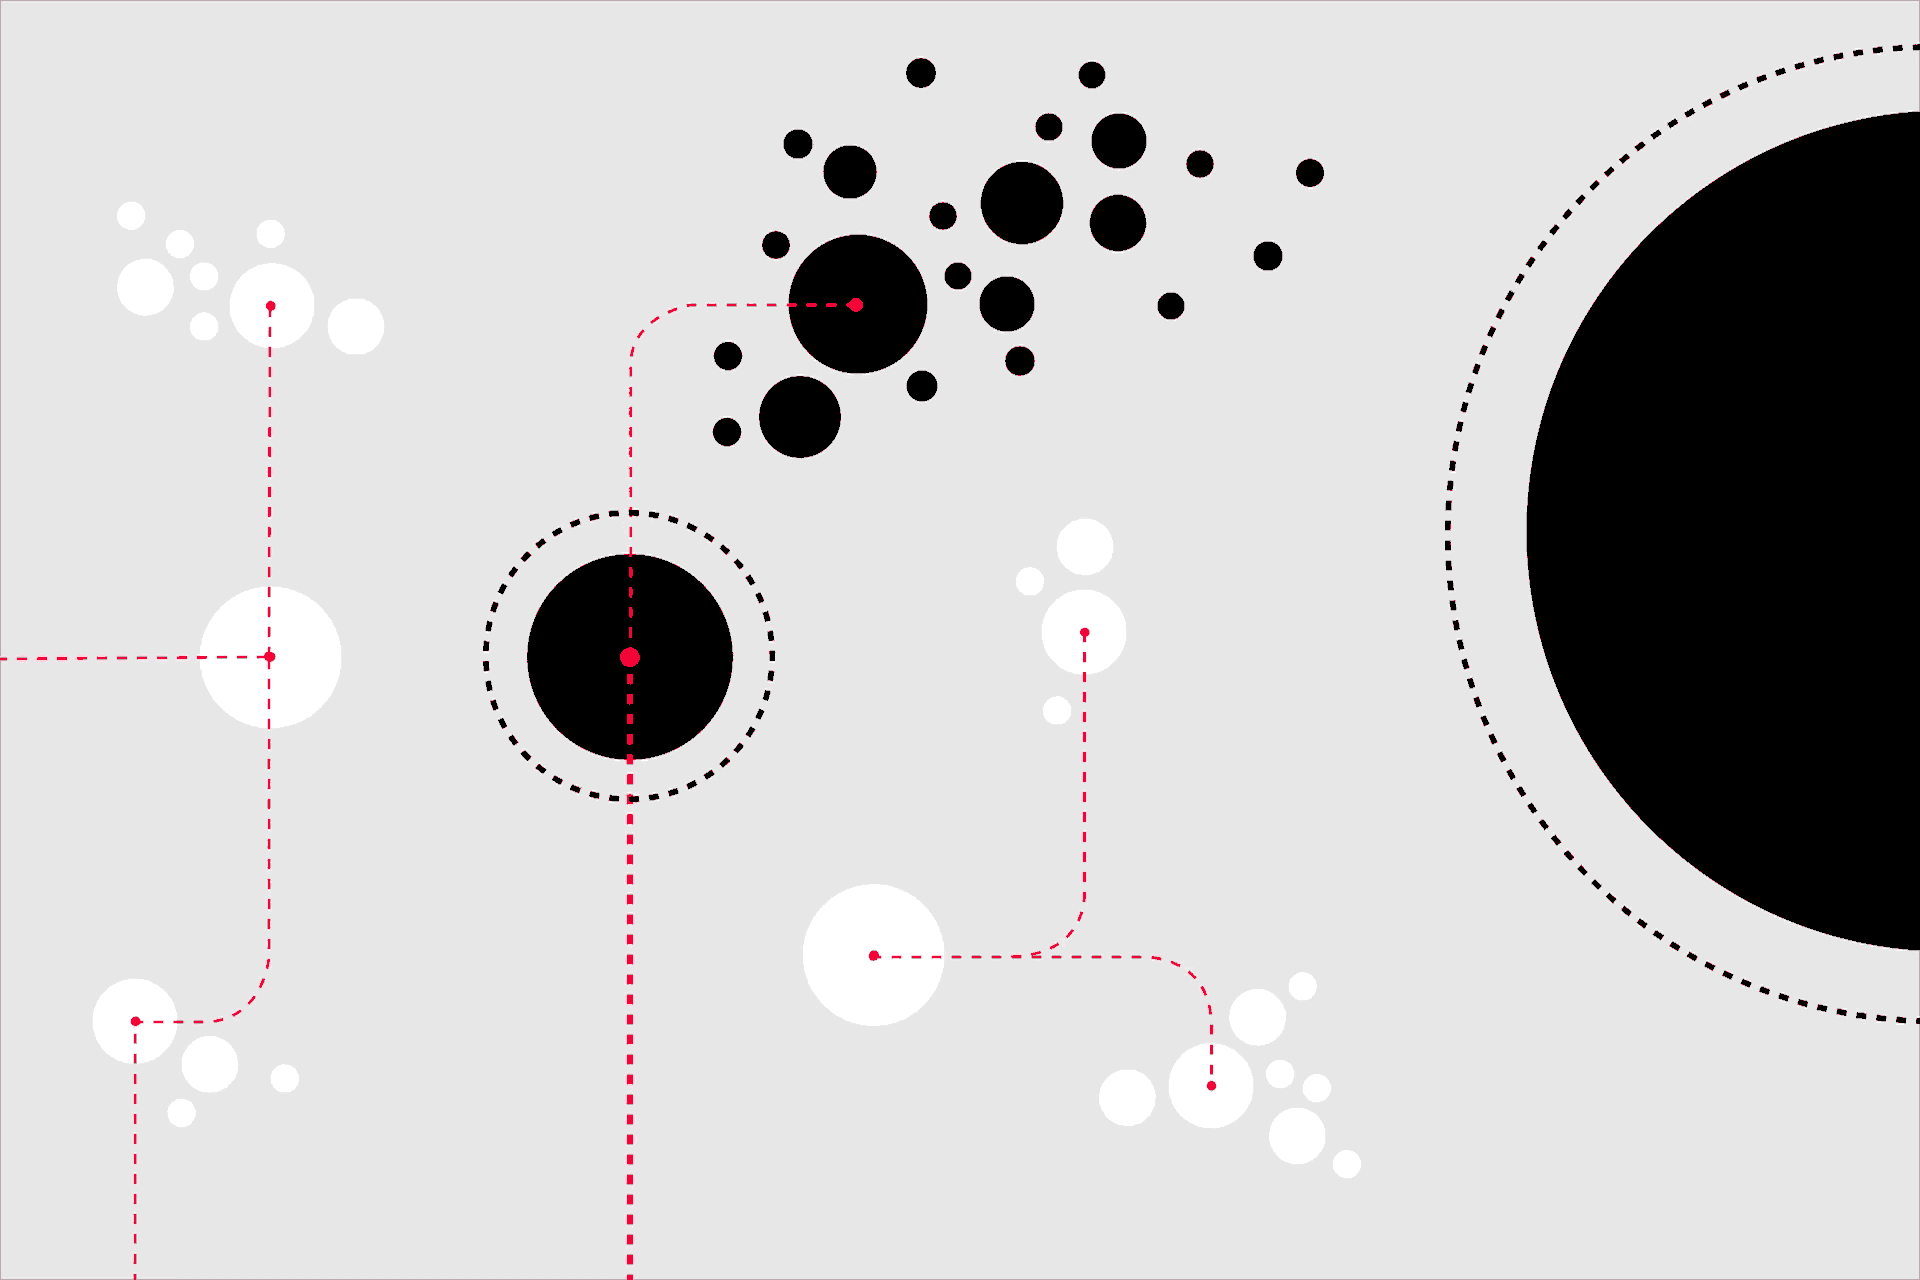 In the picture you can see various circular formations, some of them connected with each other. At regular intervals, other red circles are formed, which connect with each other by lines.